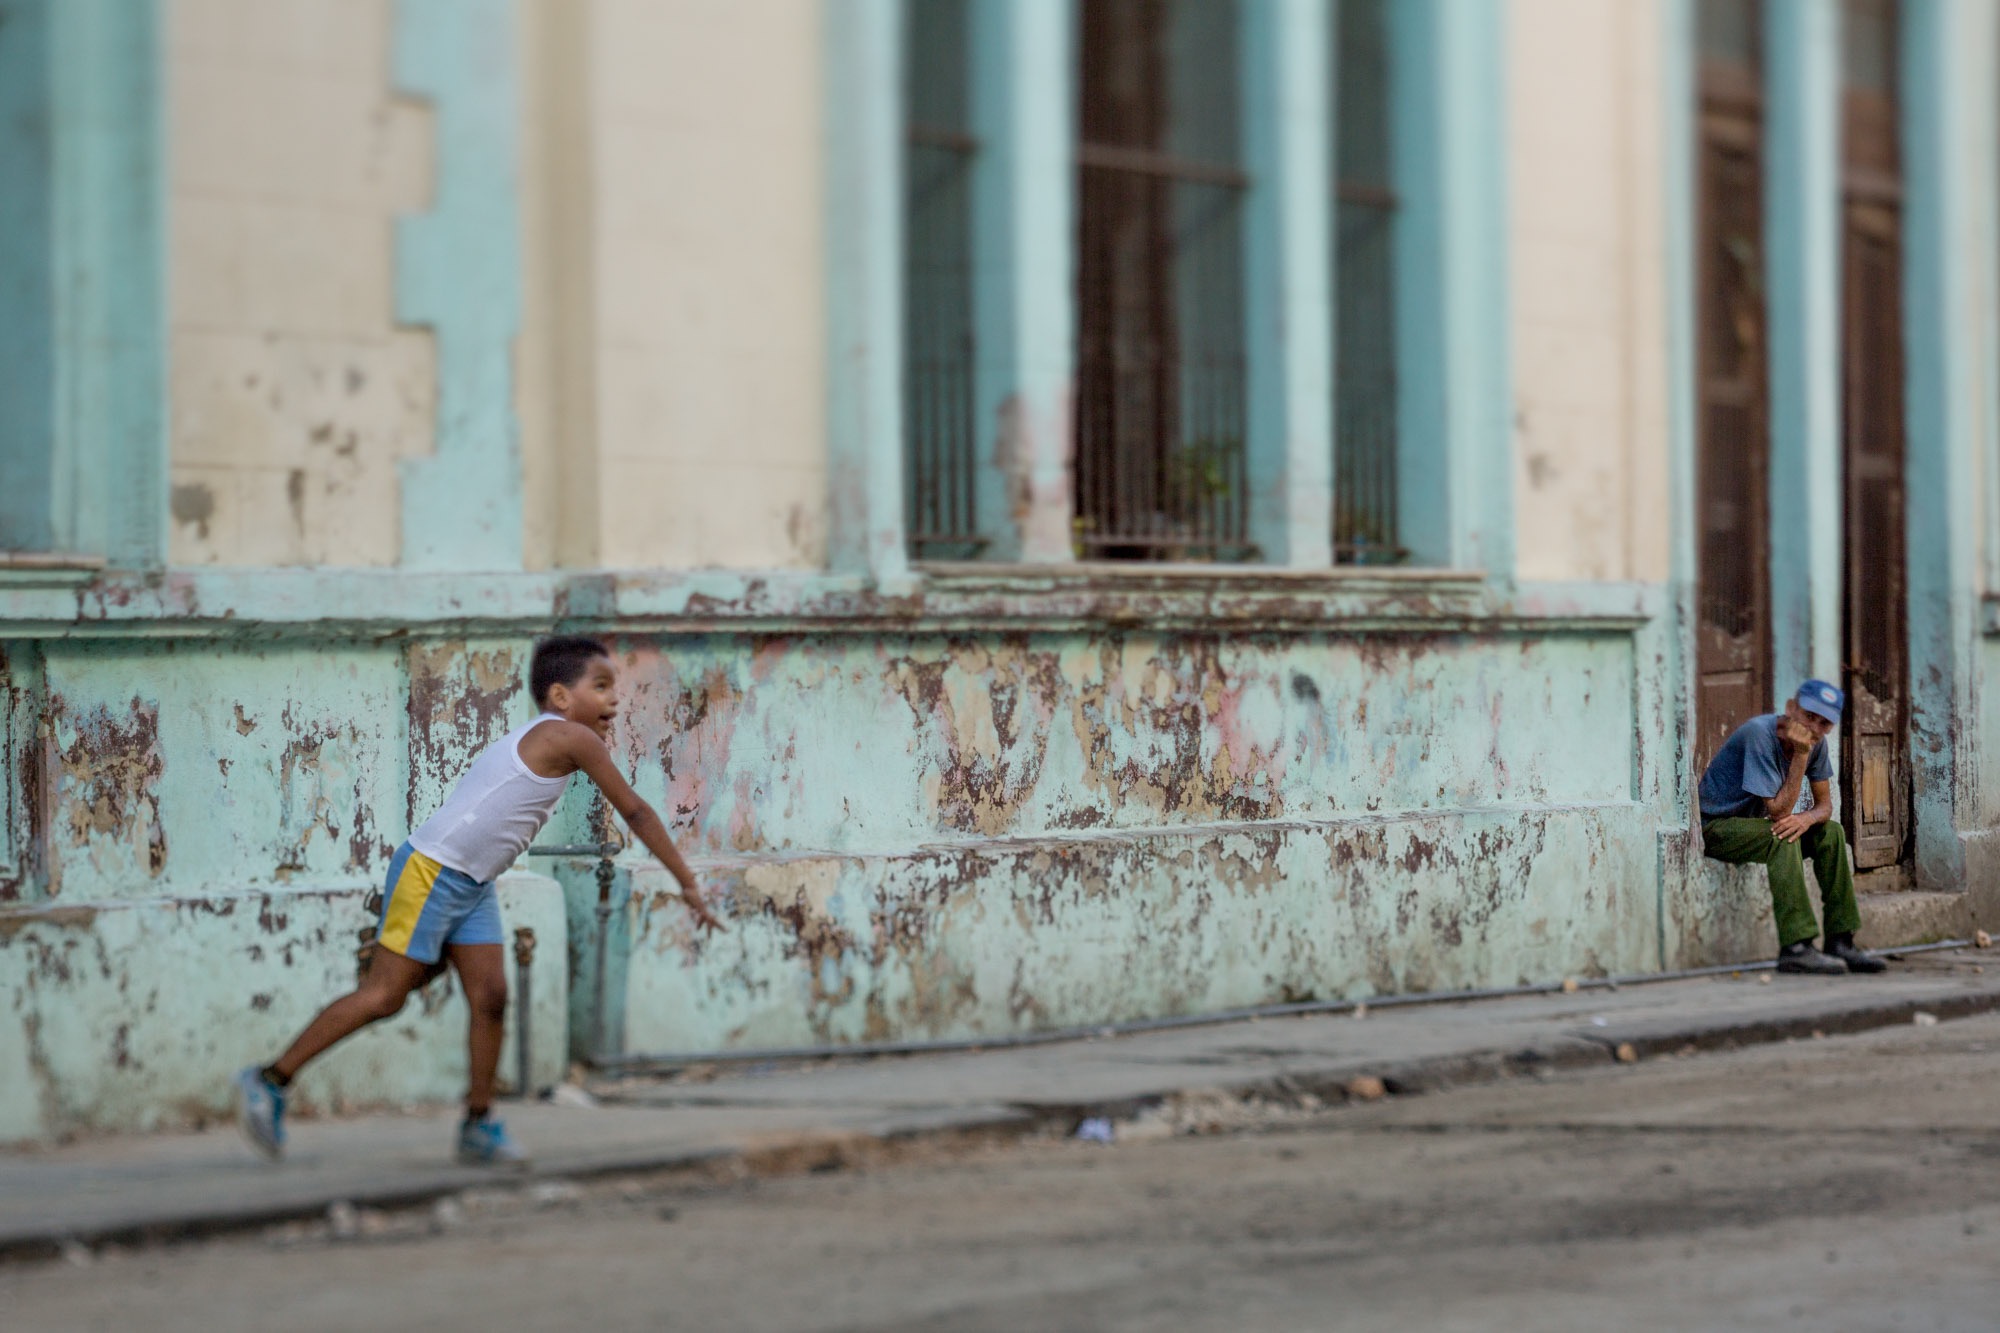 One half of a diptych, Boys playing ball in Cuba.